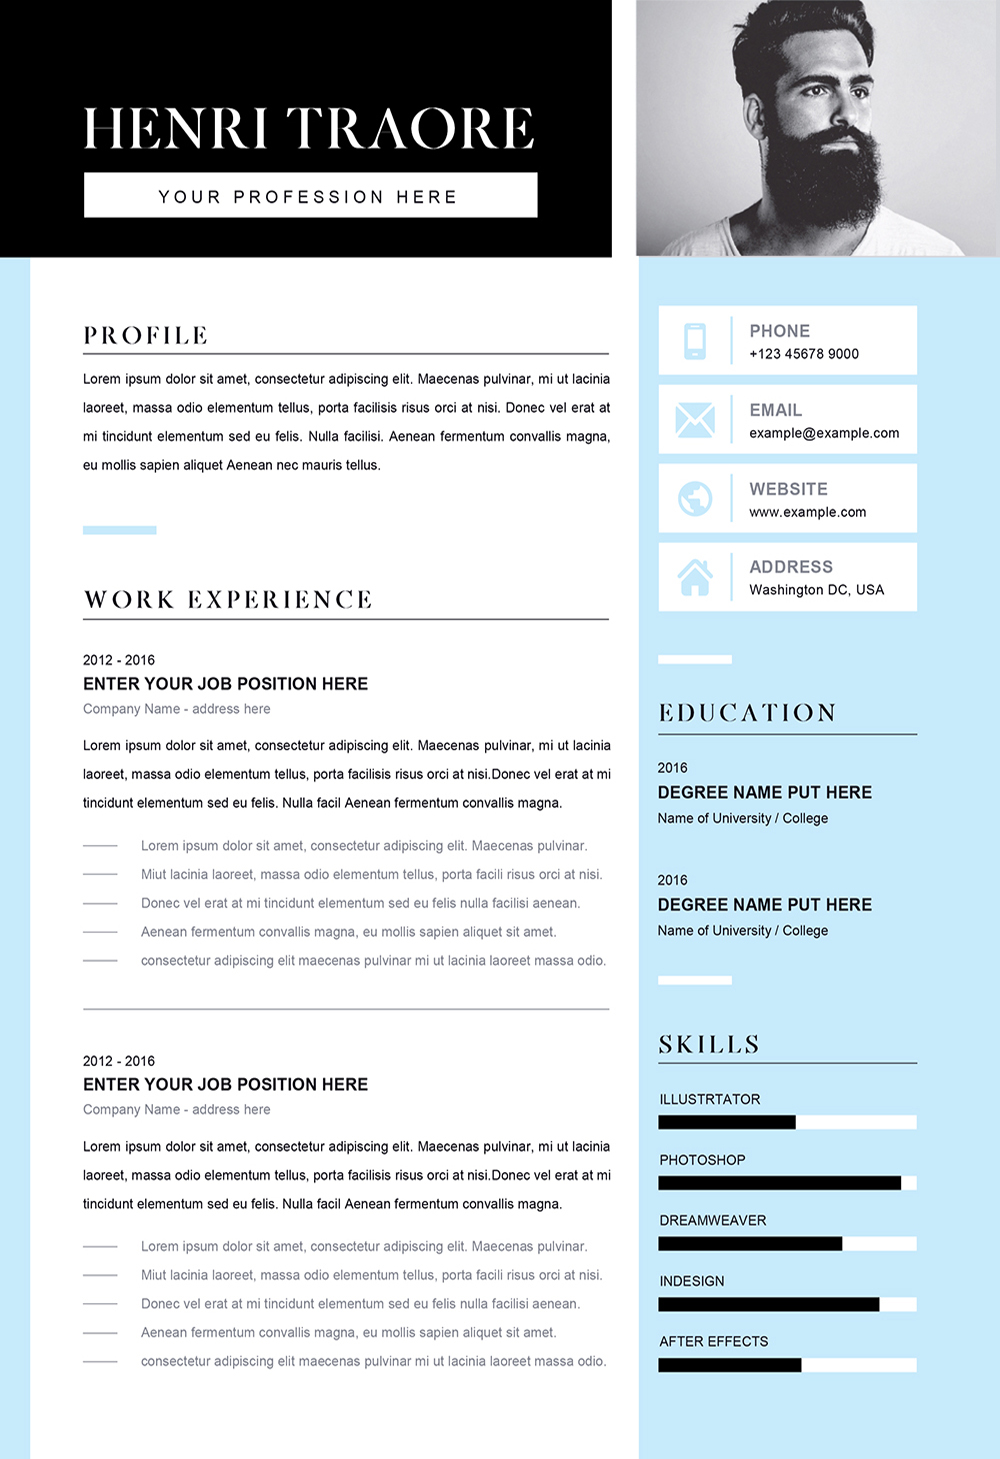 CV Resume Template For Students